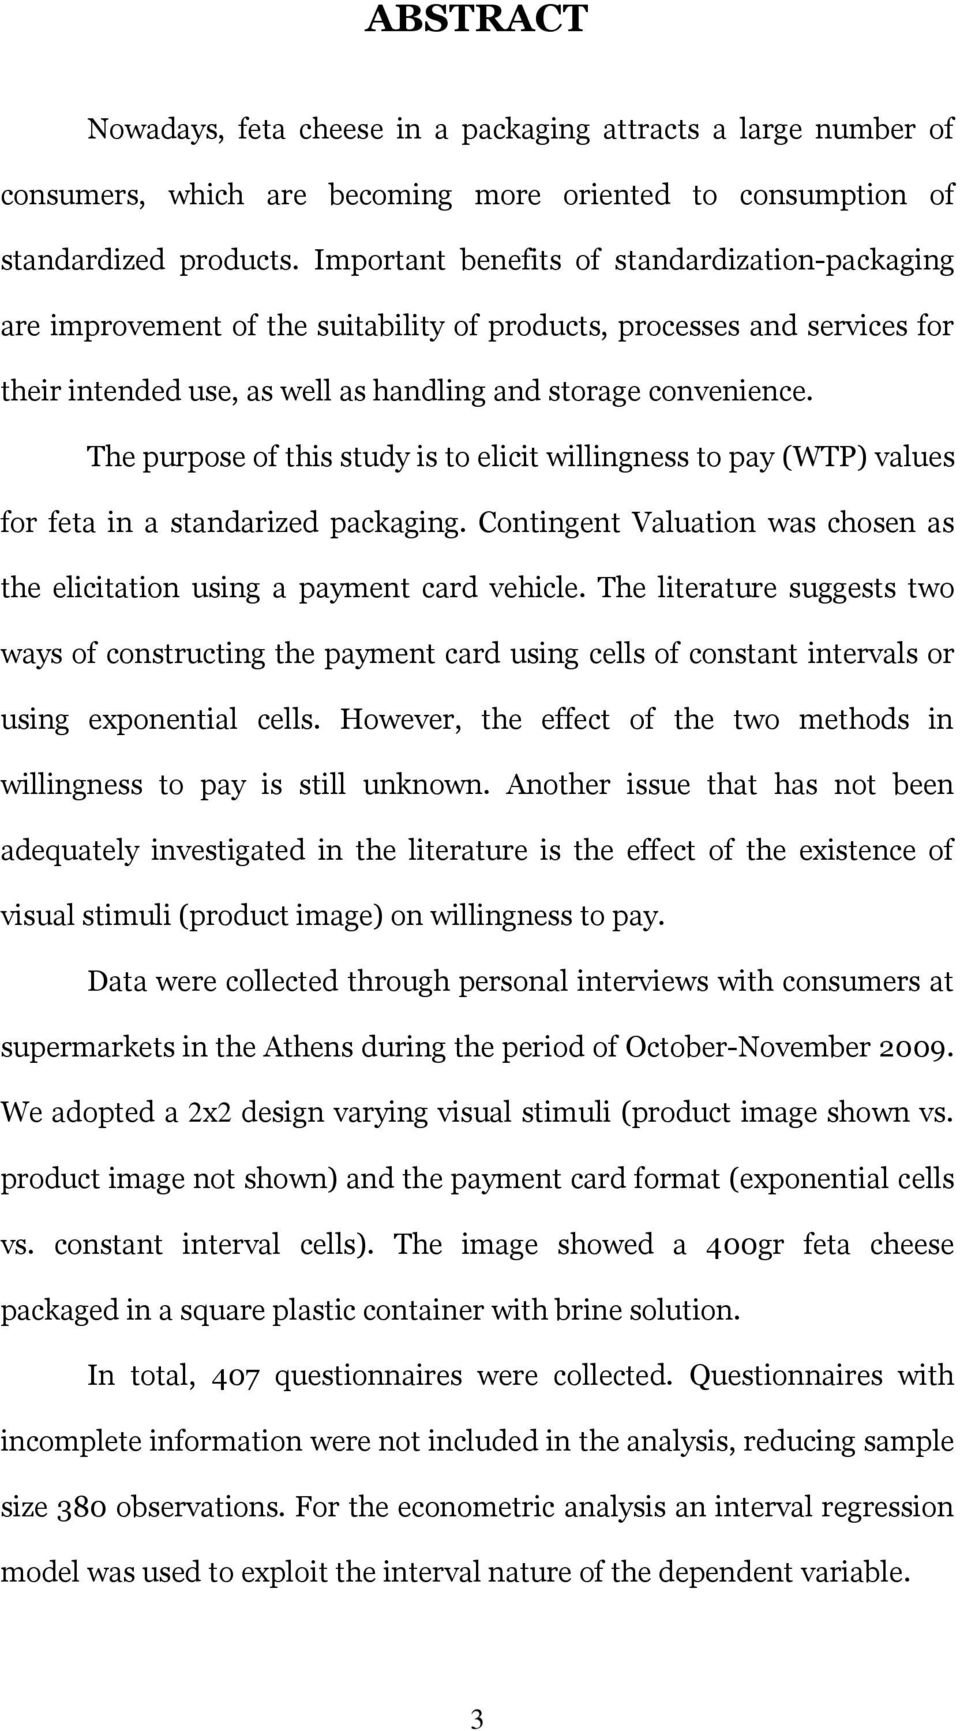 The purpose of this study is to elicit willingness to pay (WTP) values for feta in a standarized packaging. Contingent Valuation was chosen as the elicitation using a payment card vehicle.